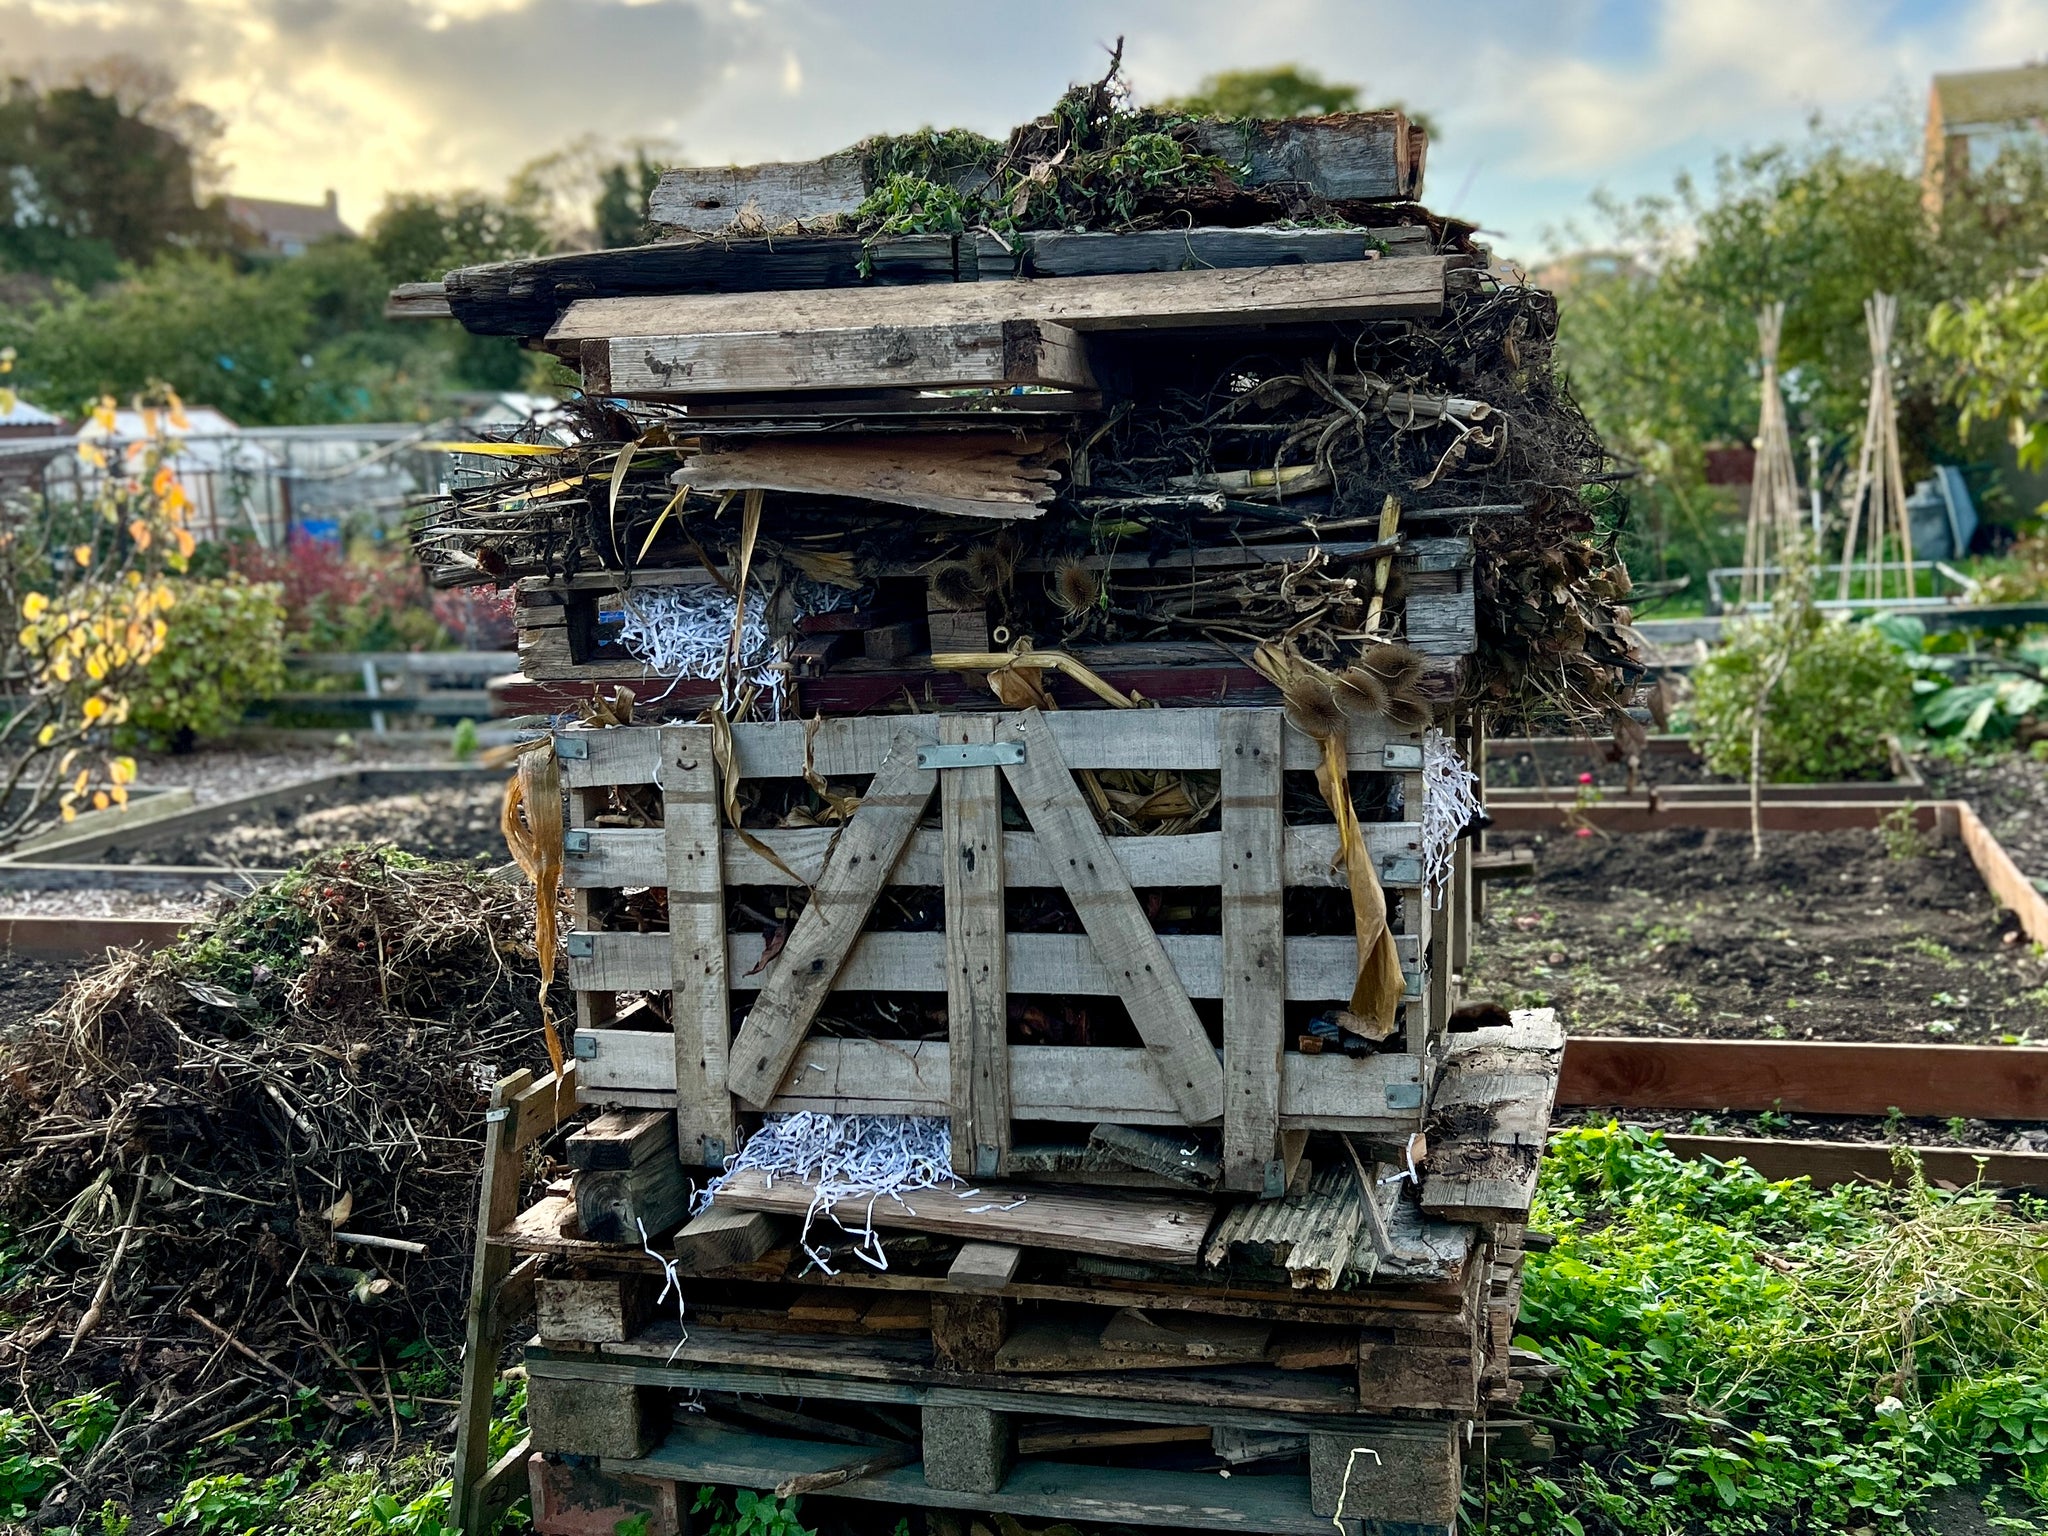 Insect hotel or bonfire?